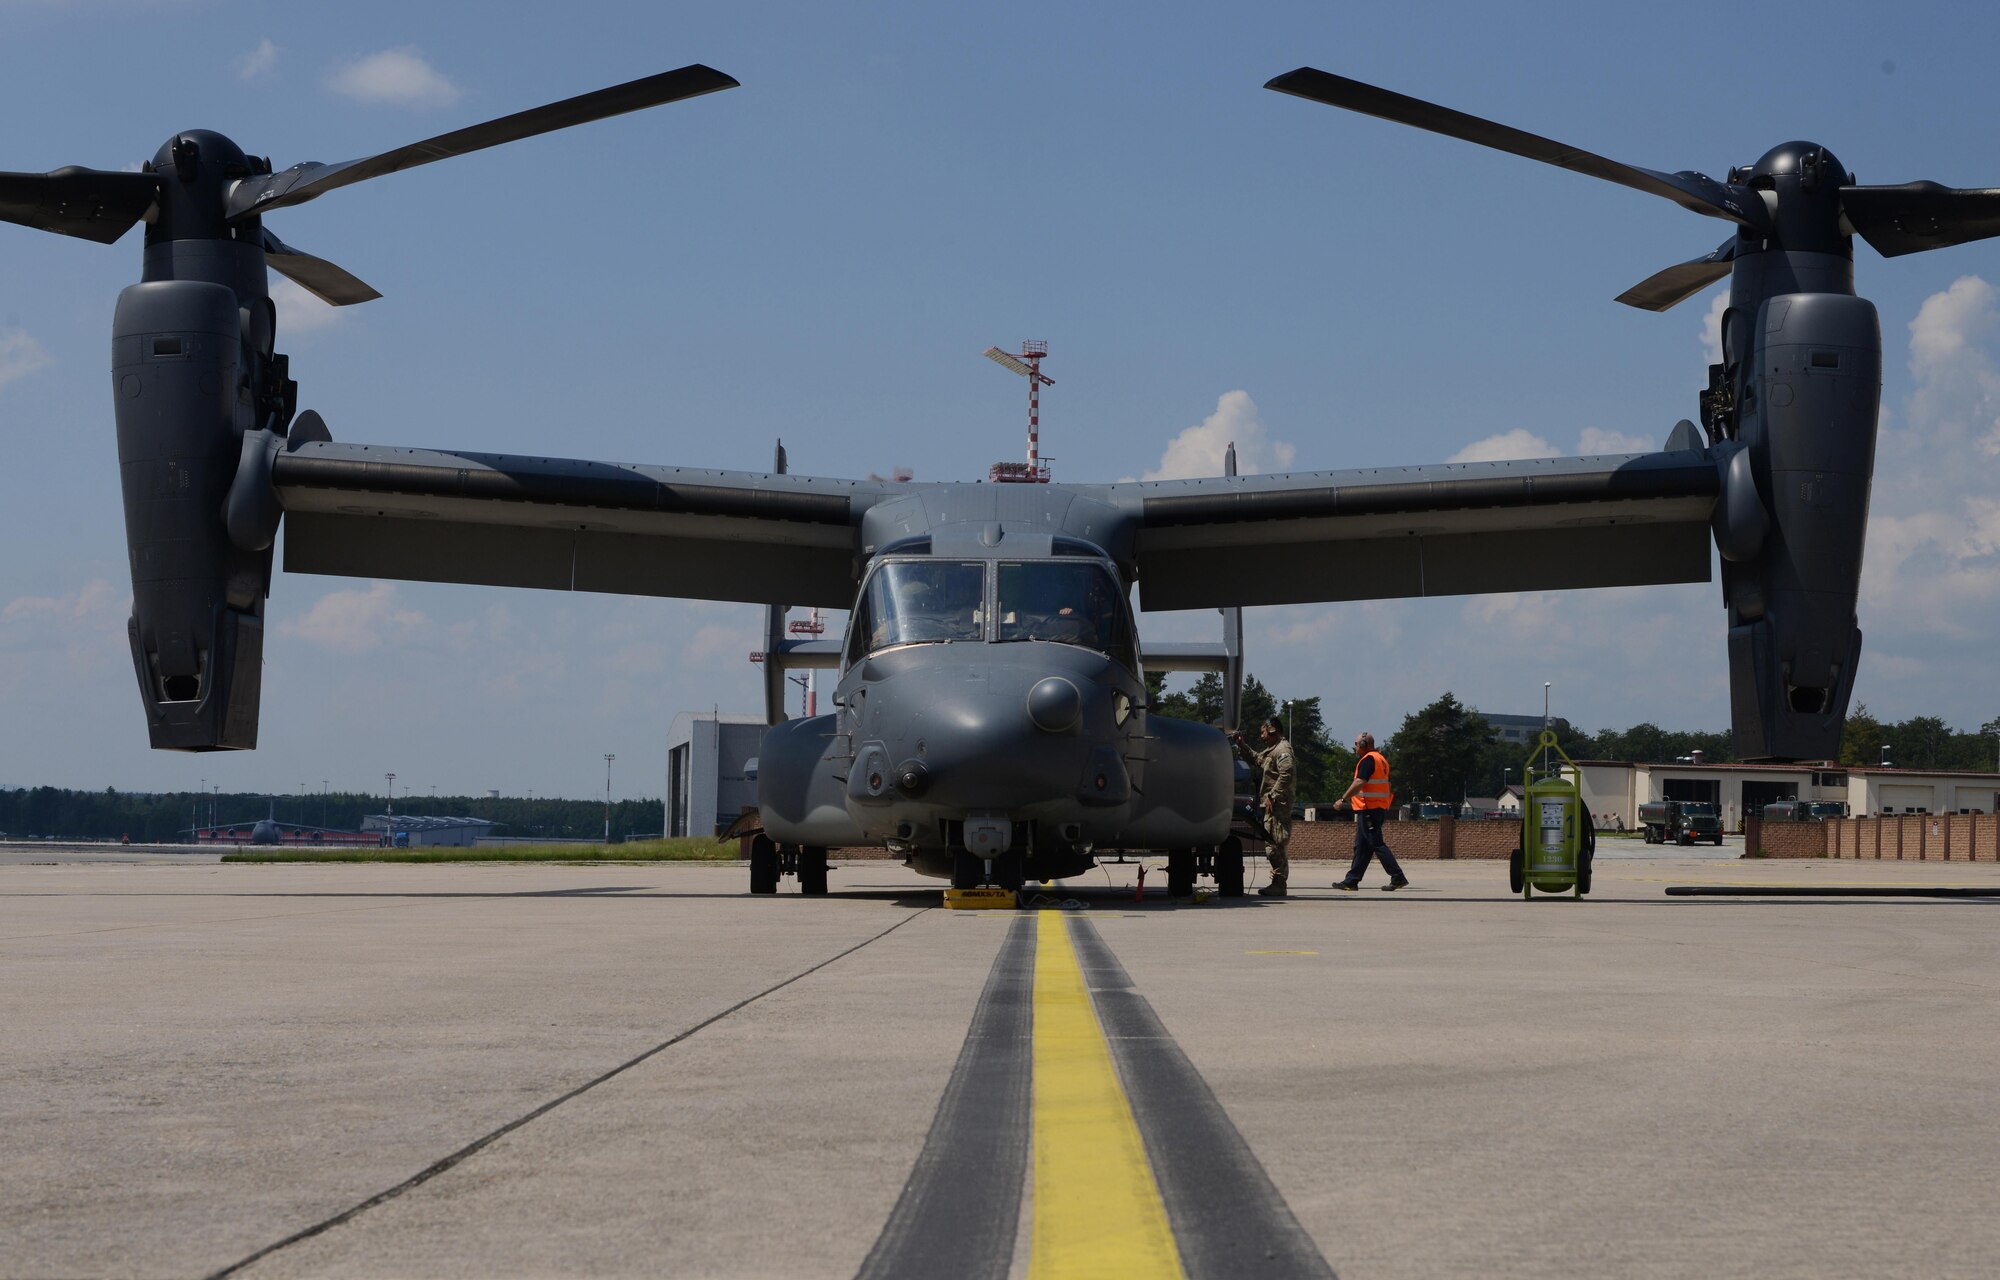 An Airman from the 7th Special Operations Squadron at Royal Air Force Mildenhall, England, prepares a CV-22 Osprey for departure at Ramstein Air Base, Germany, June 6, 2016. The CV-22 crew were returning to Mildenhall from the D-Day remembrance airdrops in Normandy, France, and stopped by Ramstein to pick up their squadron members returning from a deployment. (U.S. Air Force Photo/ Airman 1st Class Joshua Magbanua)